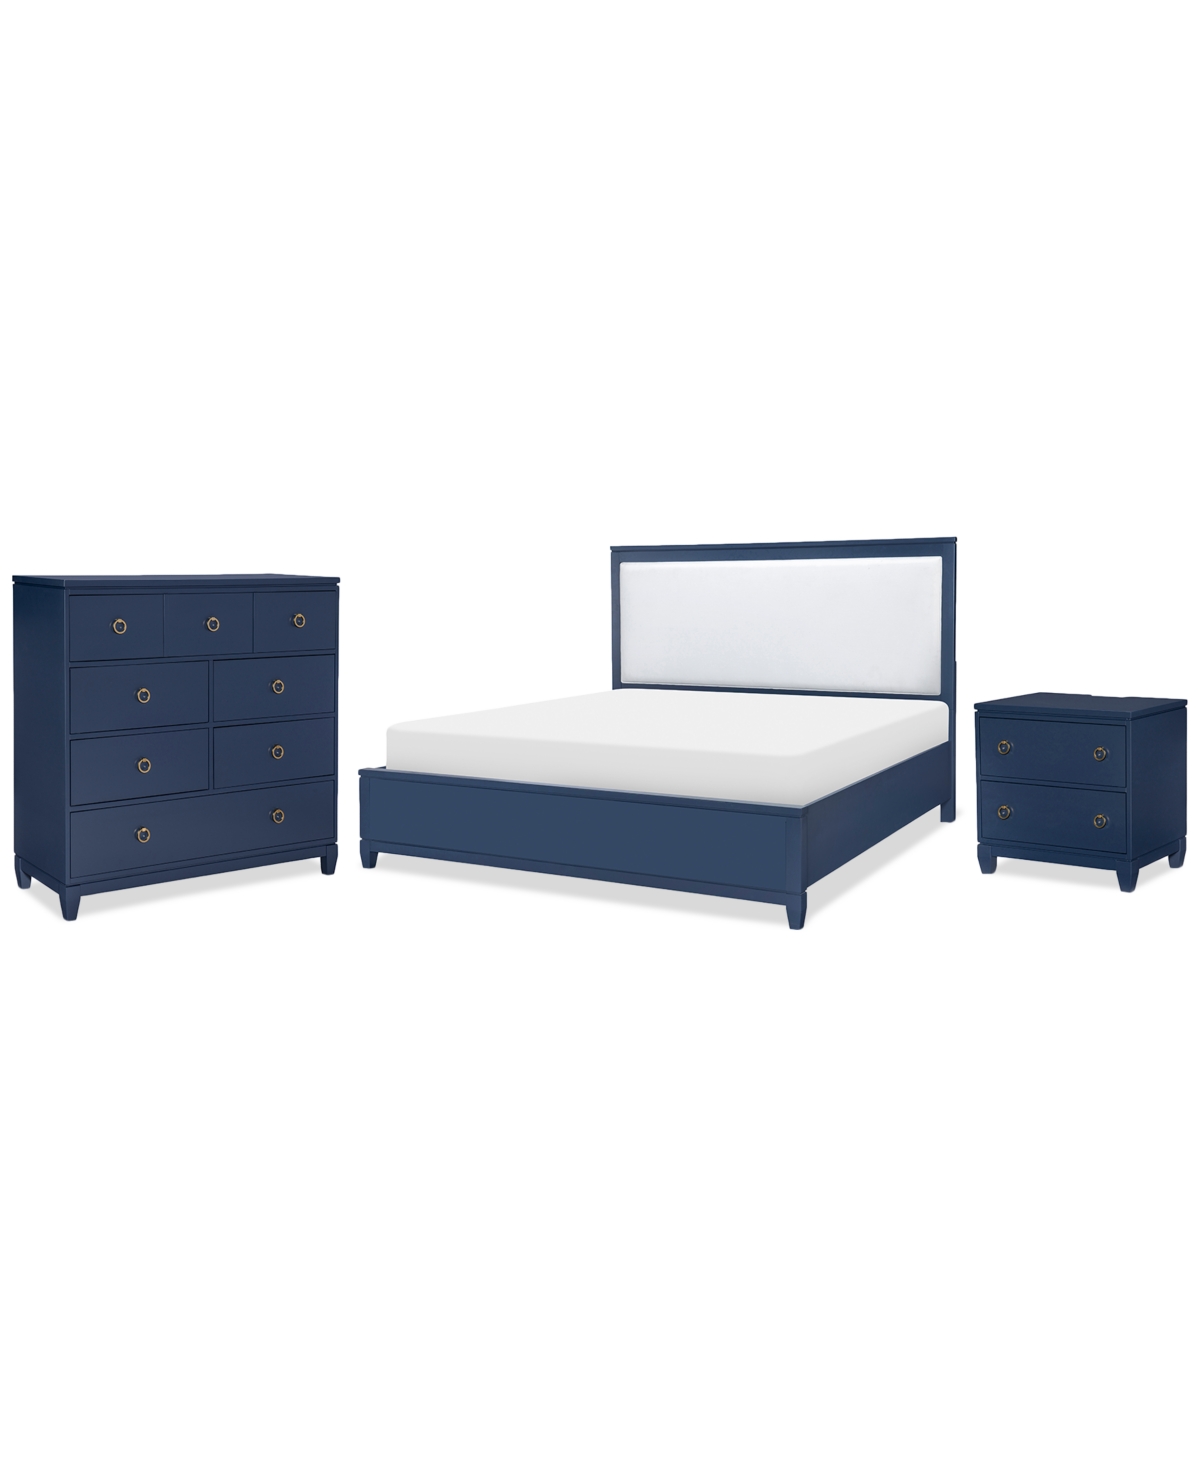 Furniture Summerland 3pc Bedroom Set (california King Upholstered Bed, Chest, Nightstand) In Blue